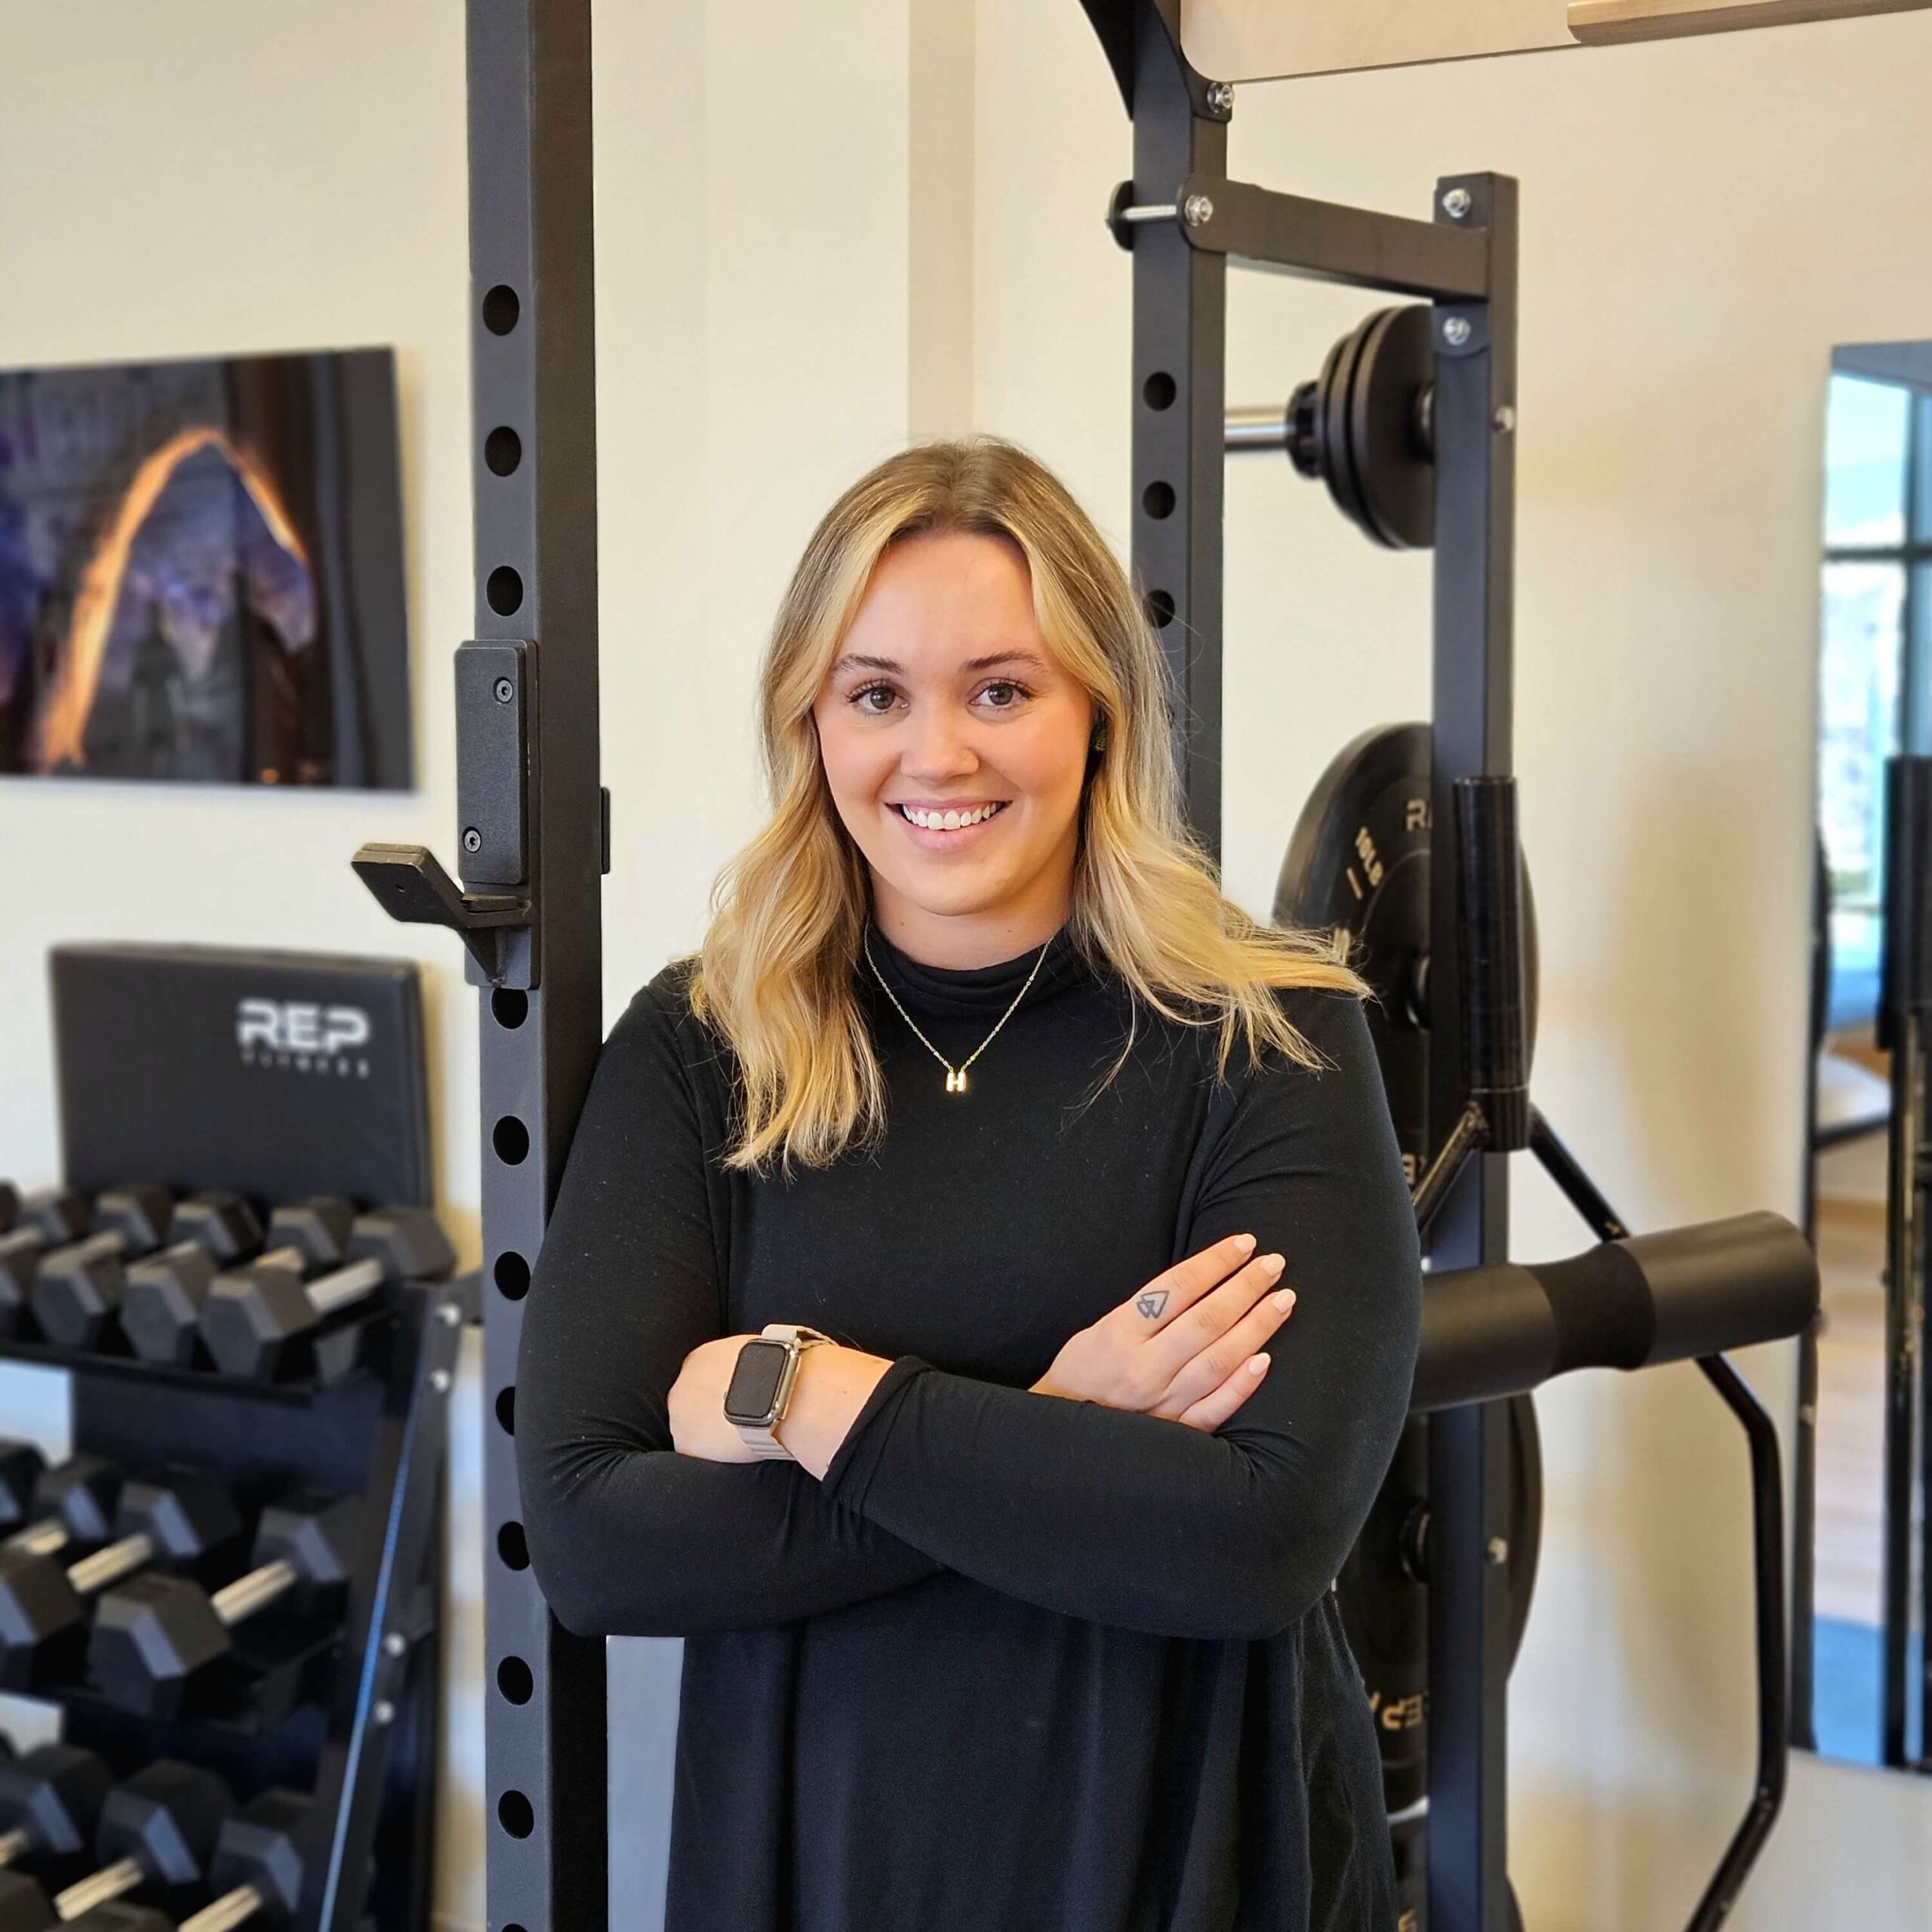 A woman with blonde hair smiling in a physical therapy gym, standing with her arms crossed in front of a weight rack. She is wearing a black long-sleeve shirt and a watch.